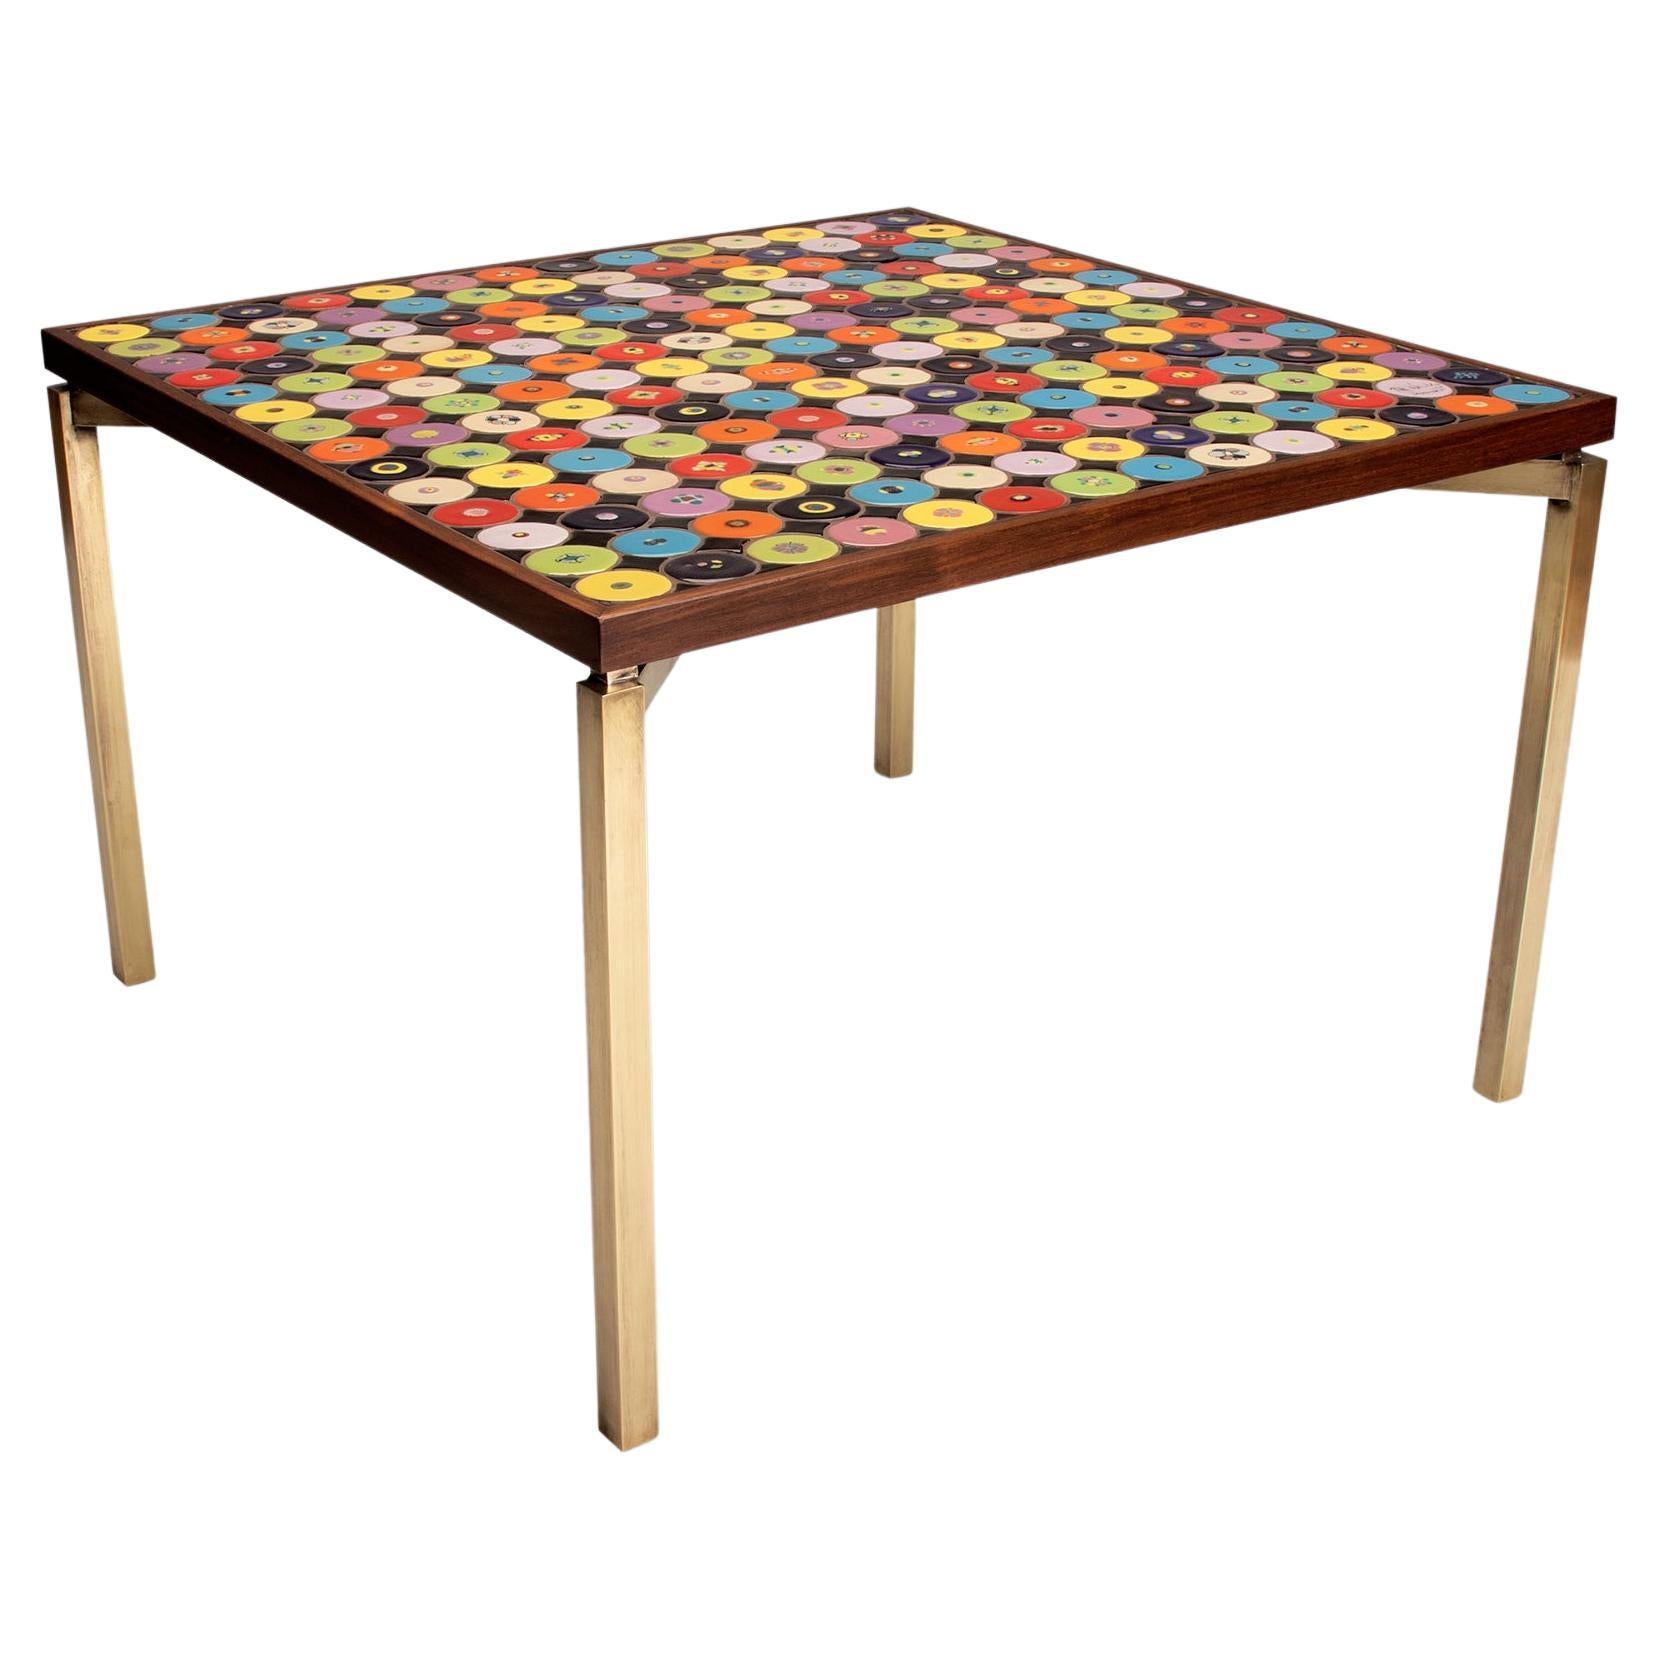 Danish modern coffee table with red, yellow, green, blue tiles and brass legs For Sale